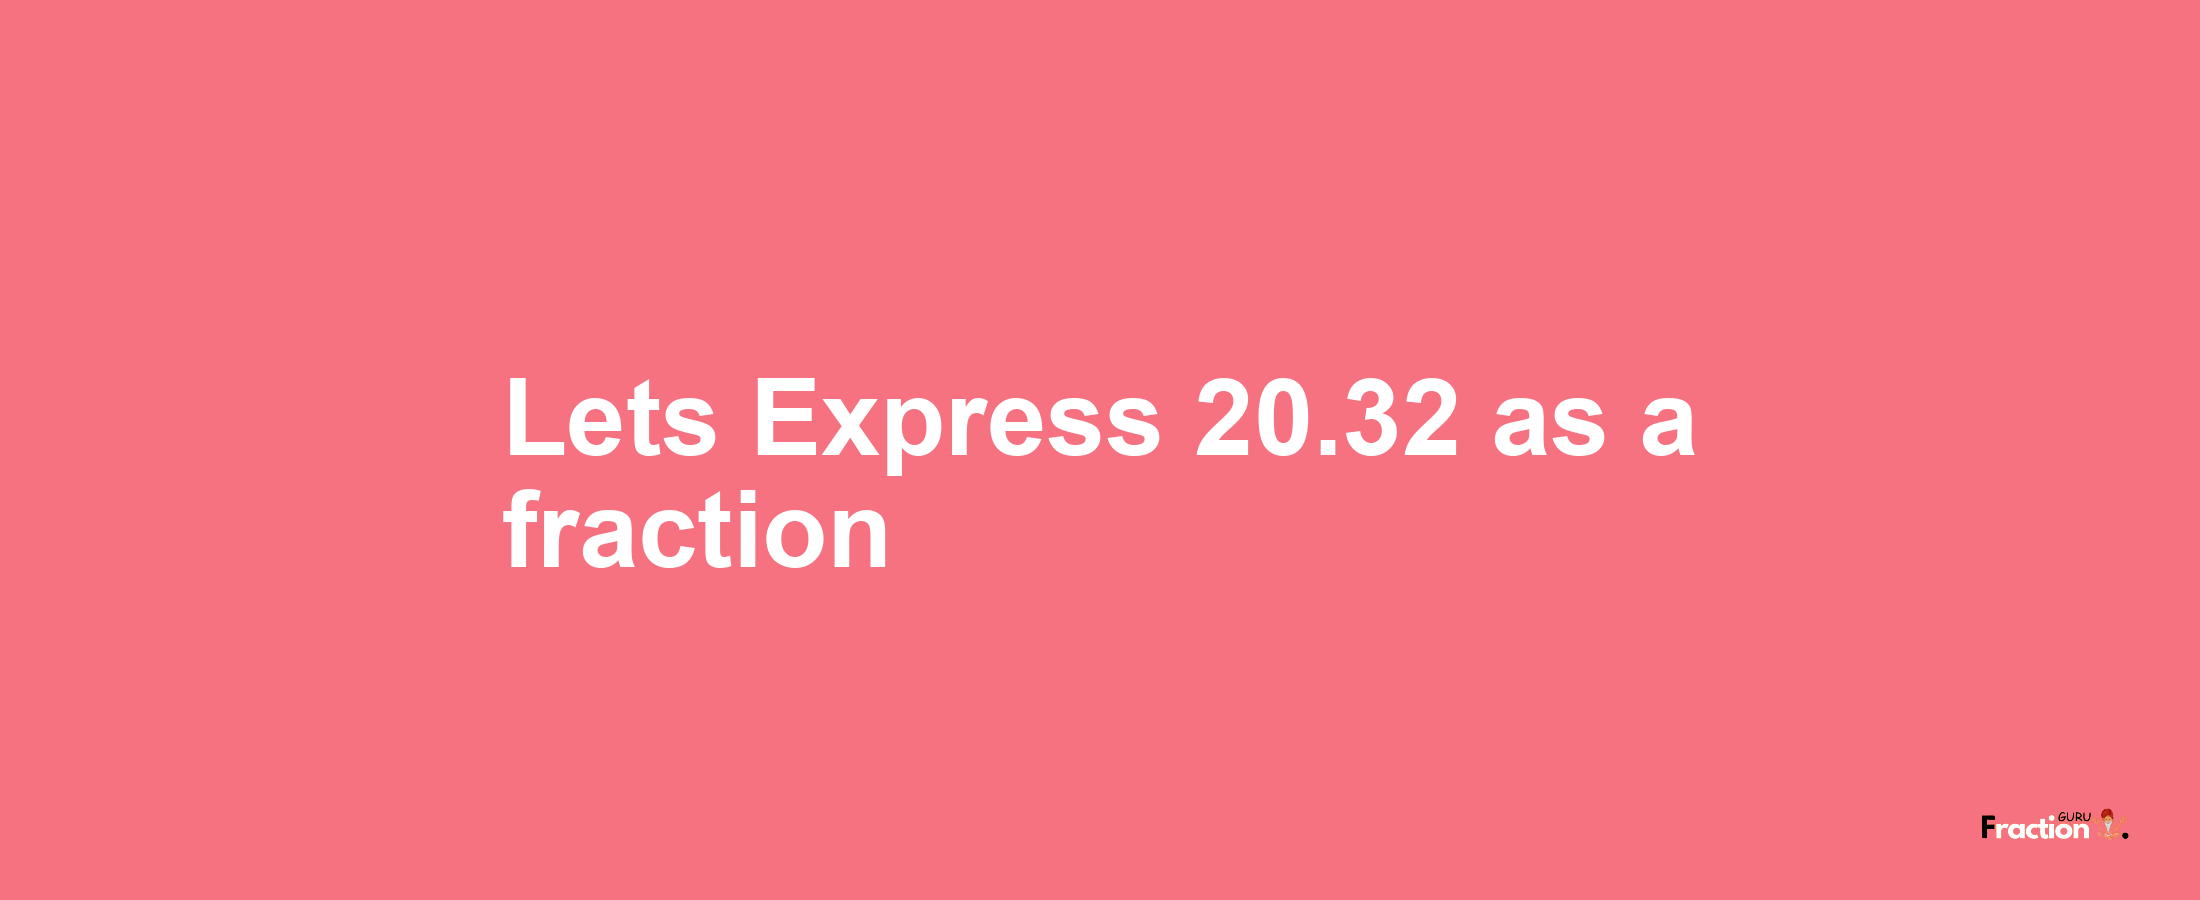 Lets Express 20.32 as afraction